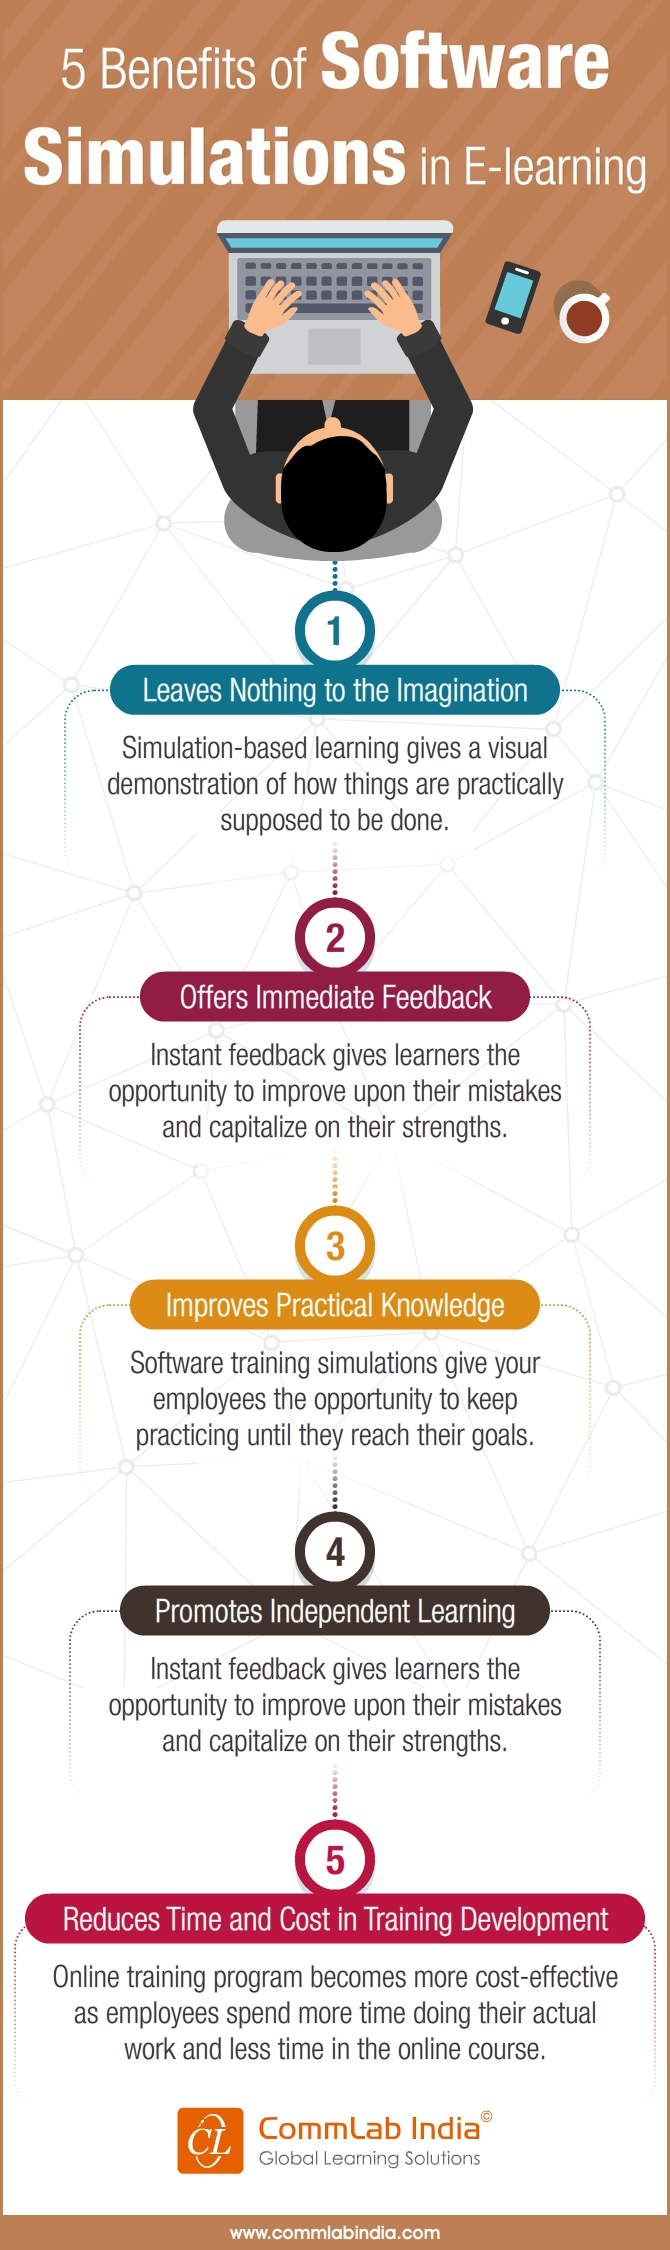 5 Benefits of Software Simulations in E-learning [Infographic]